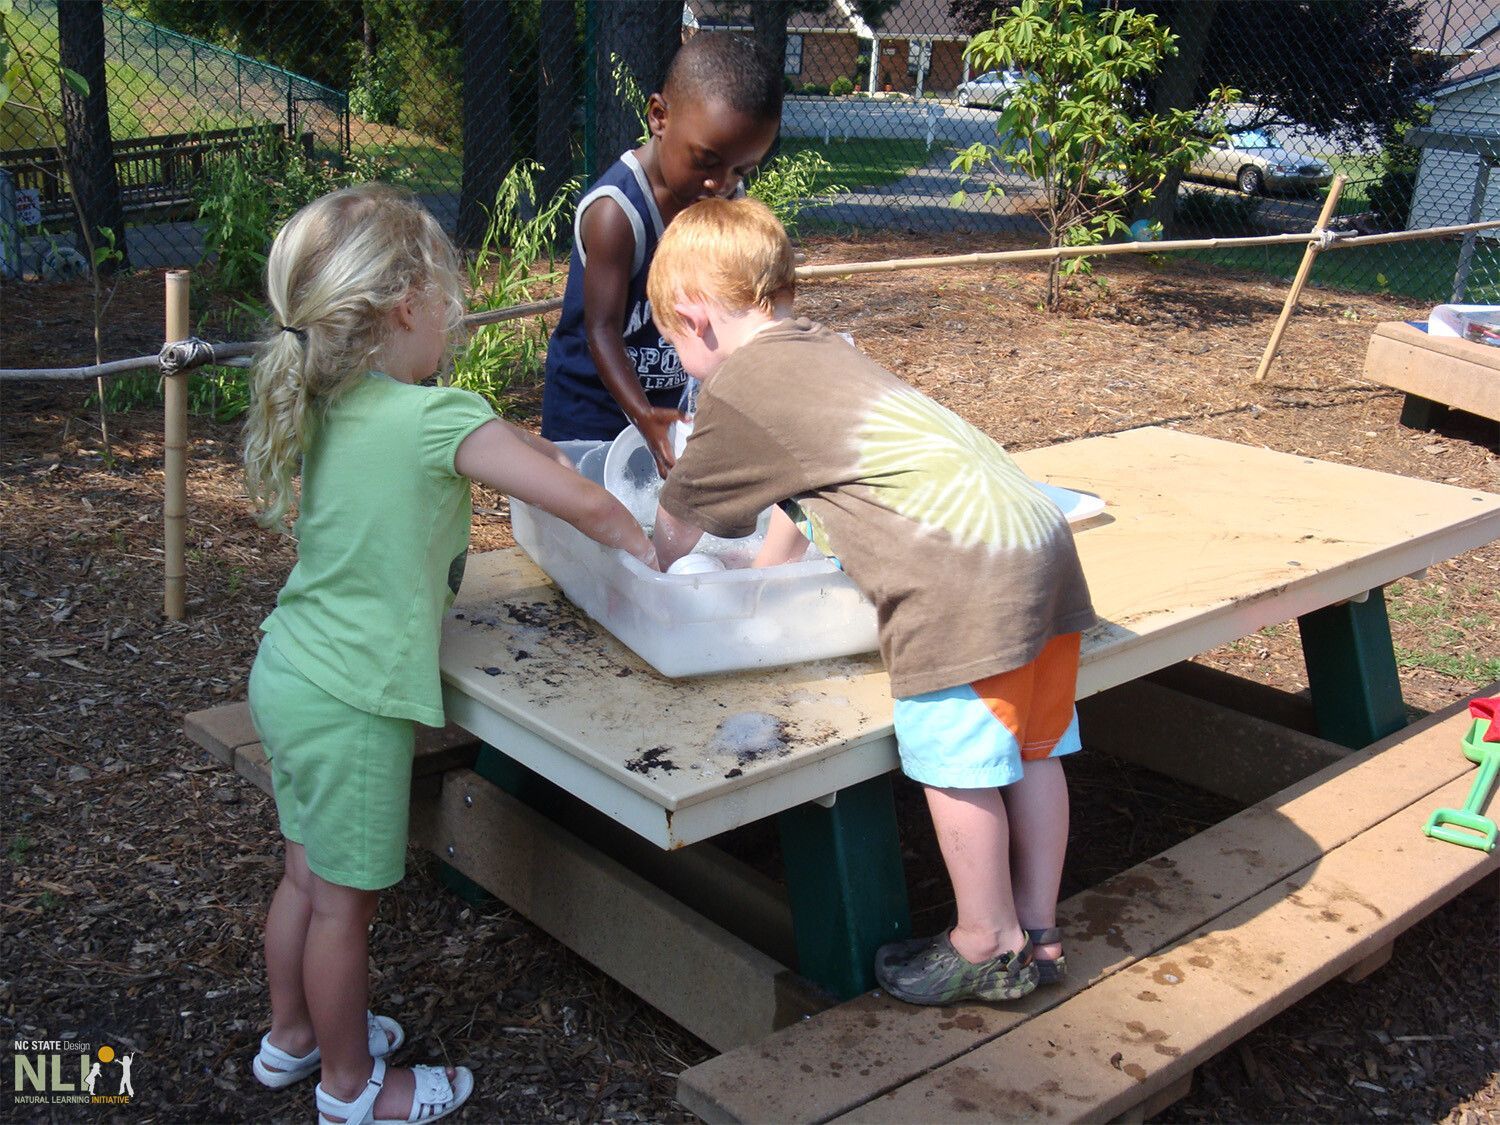 children engaging in water play in a plastic container